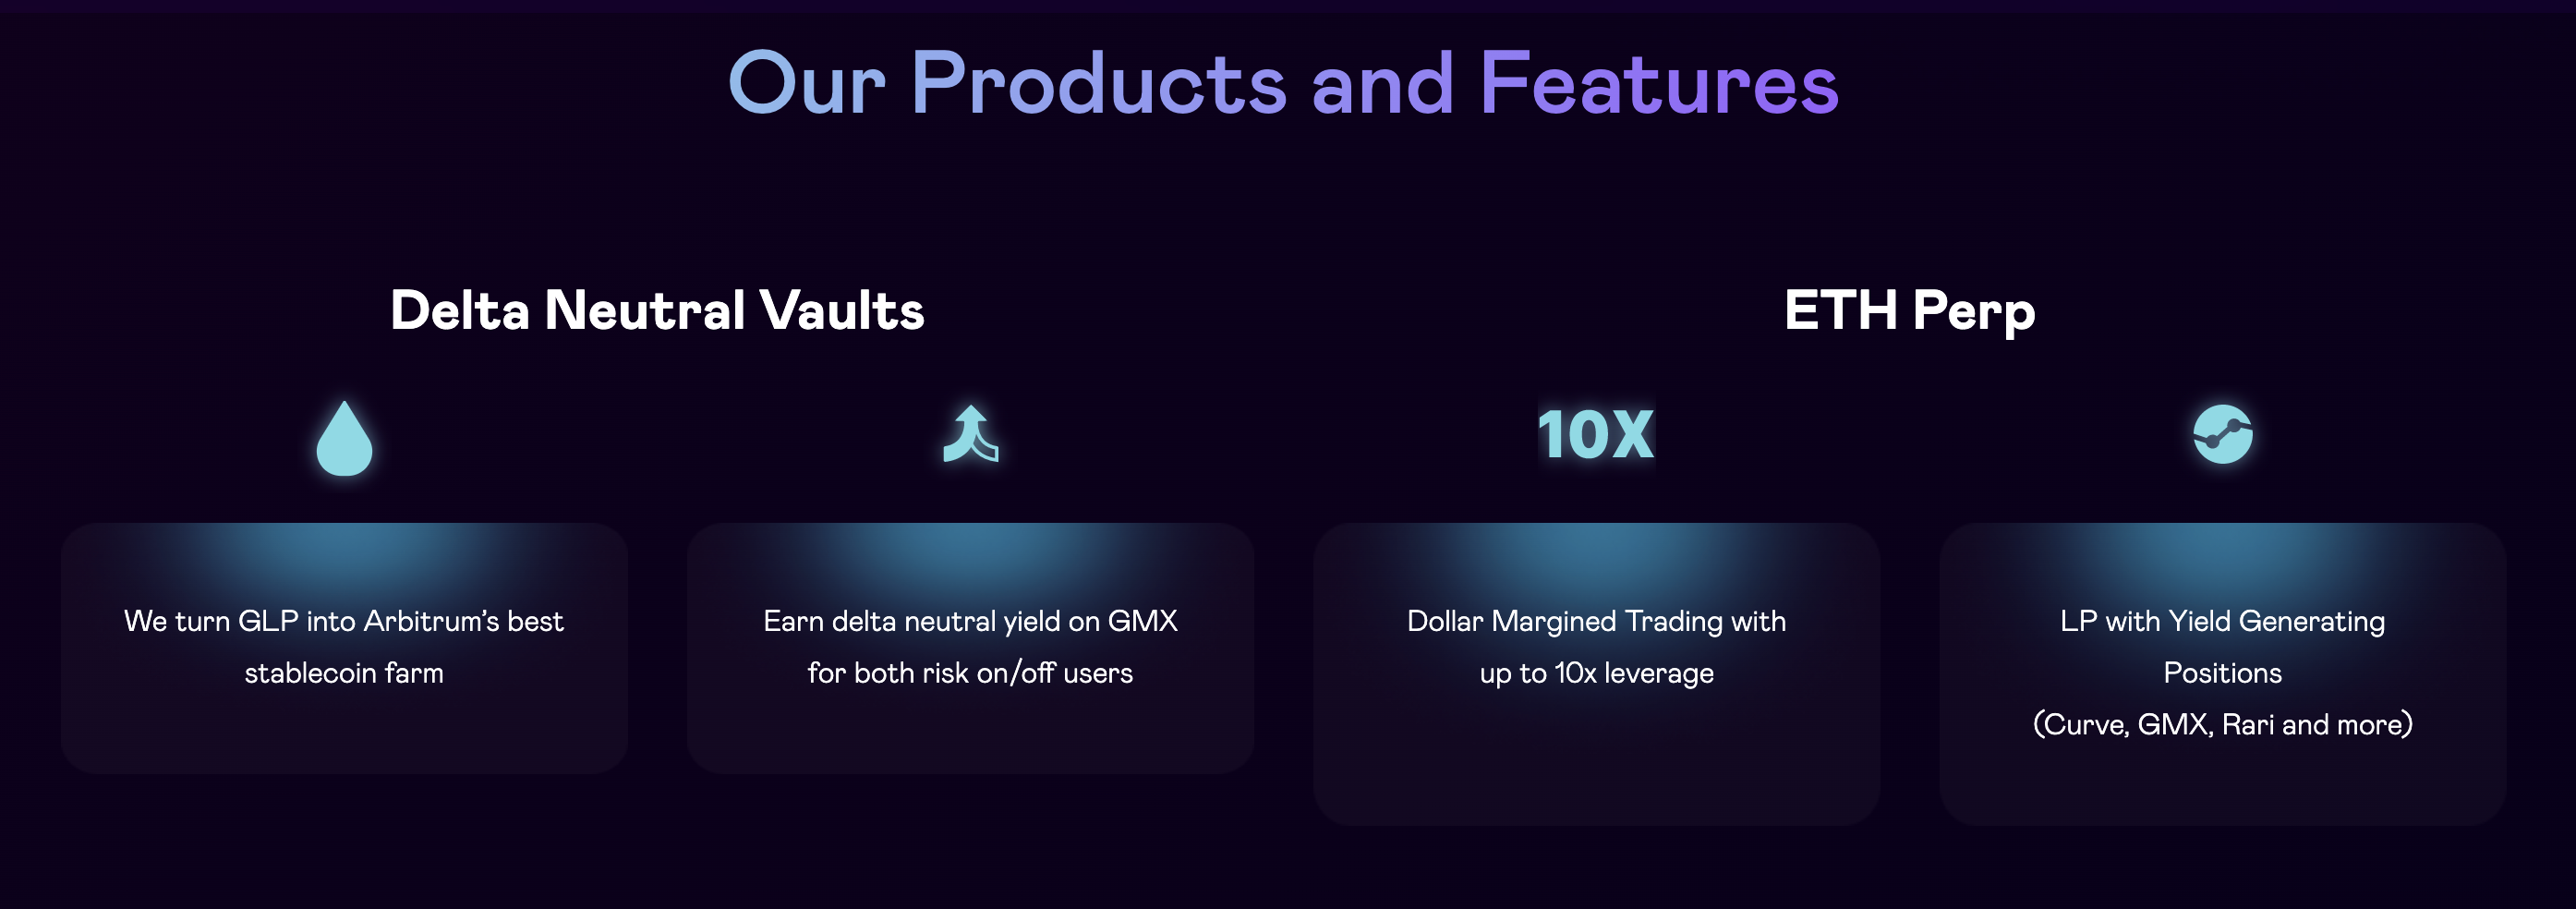 Rage Trade's products, including its GMX products and ETH perp